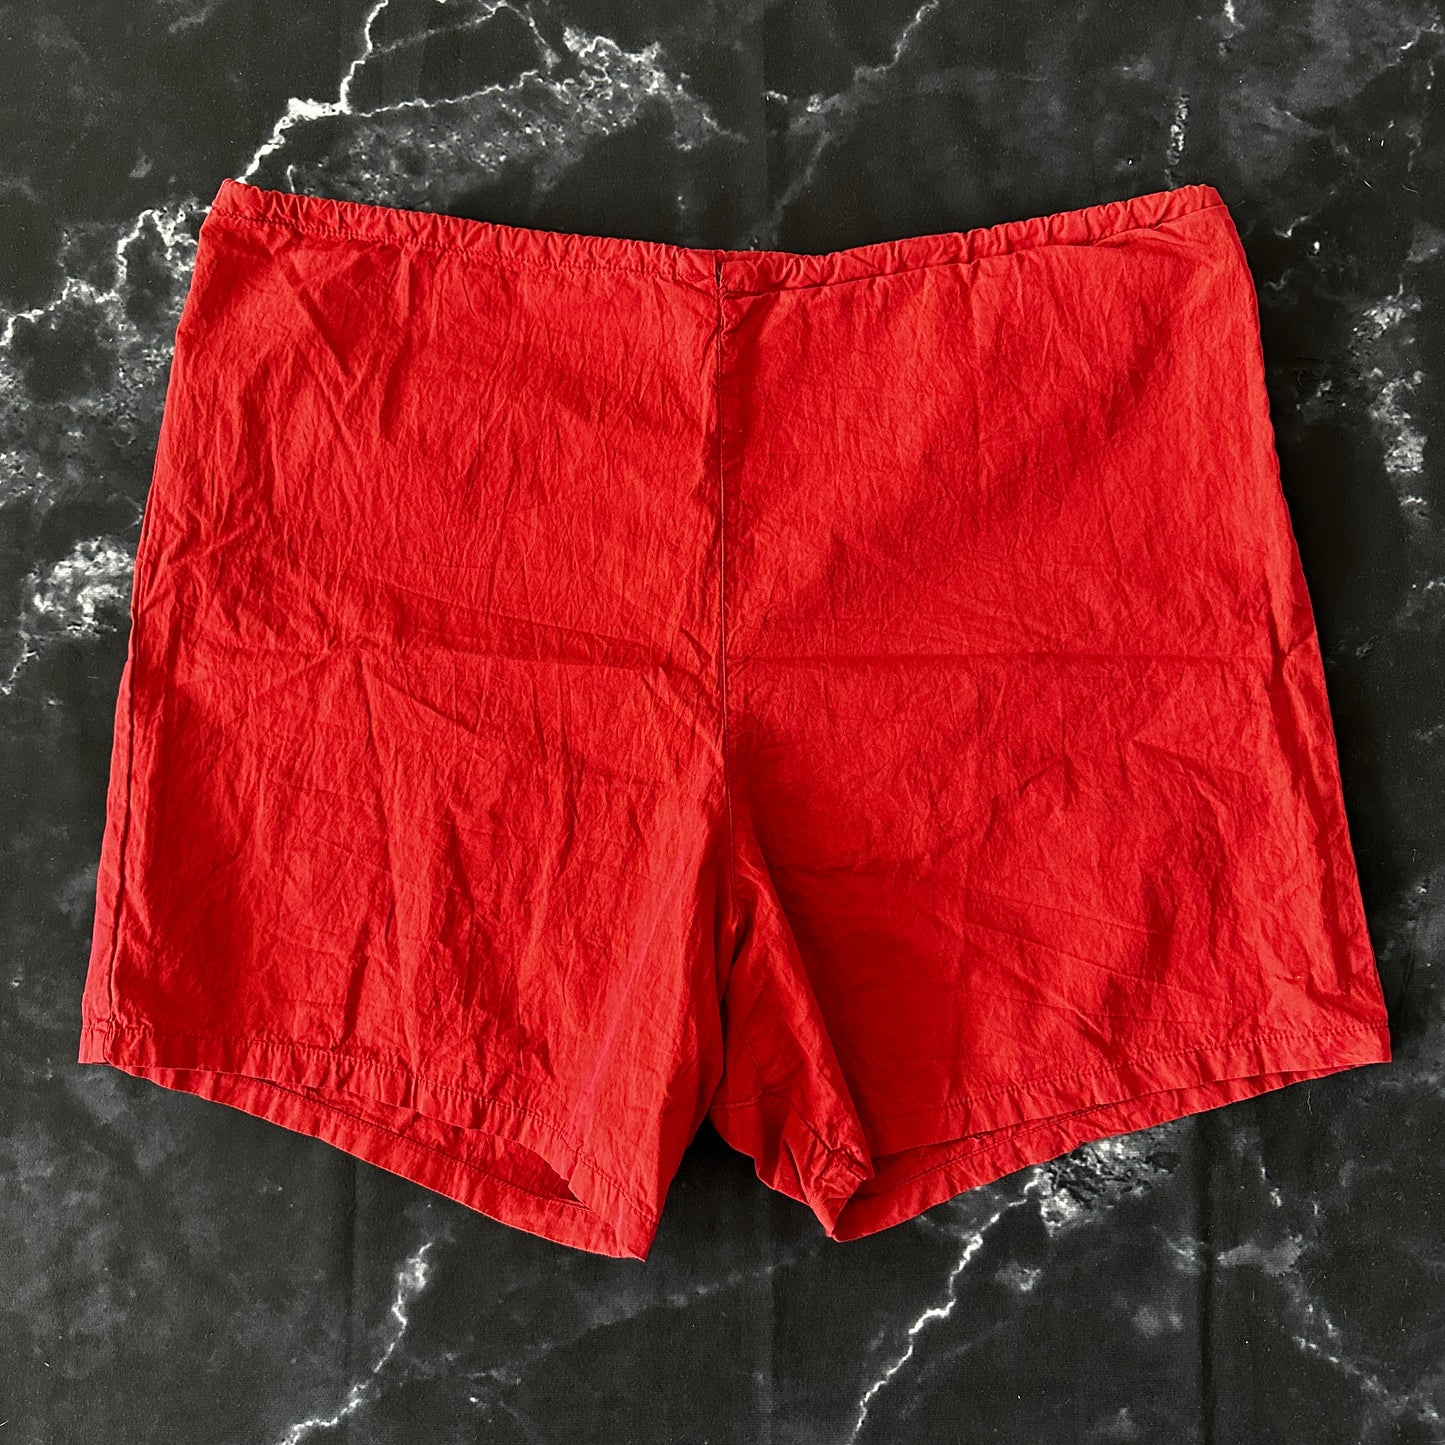 CP Company Vintage 80s Swim Shorts - 48 / M - Made in Italy